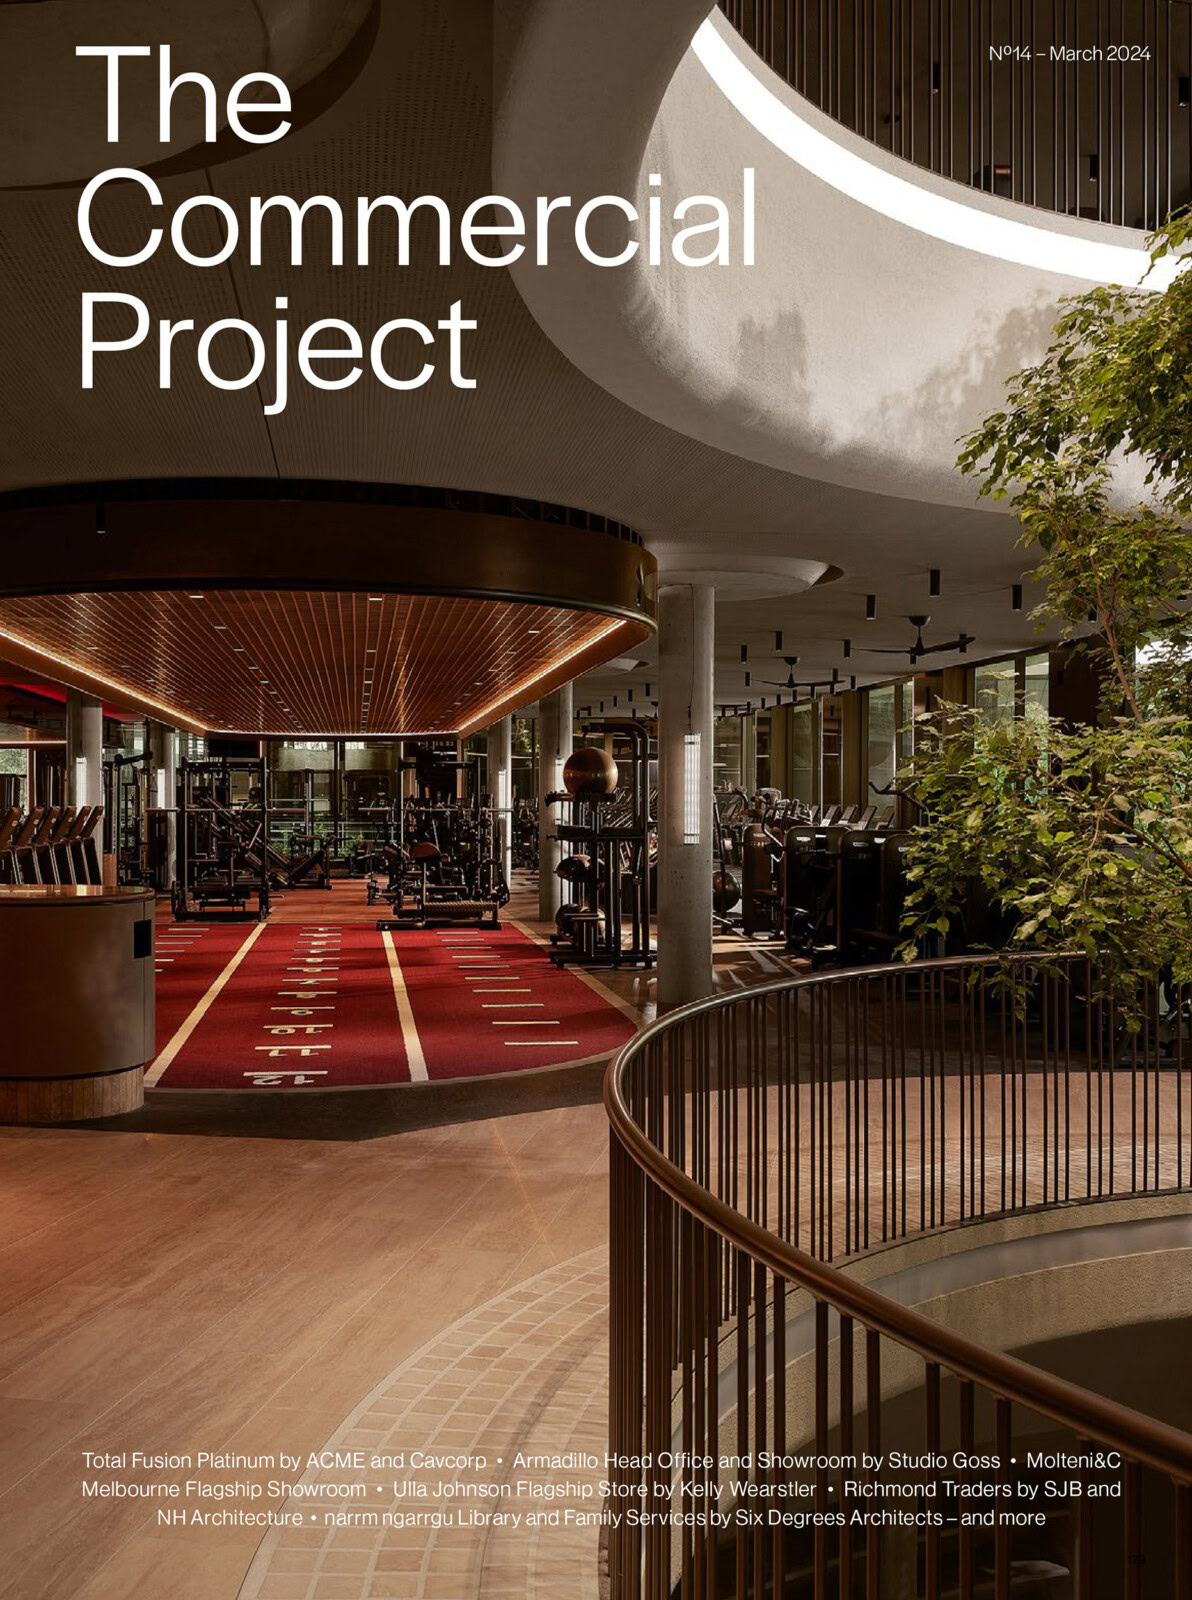 The Commercial Project